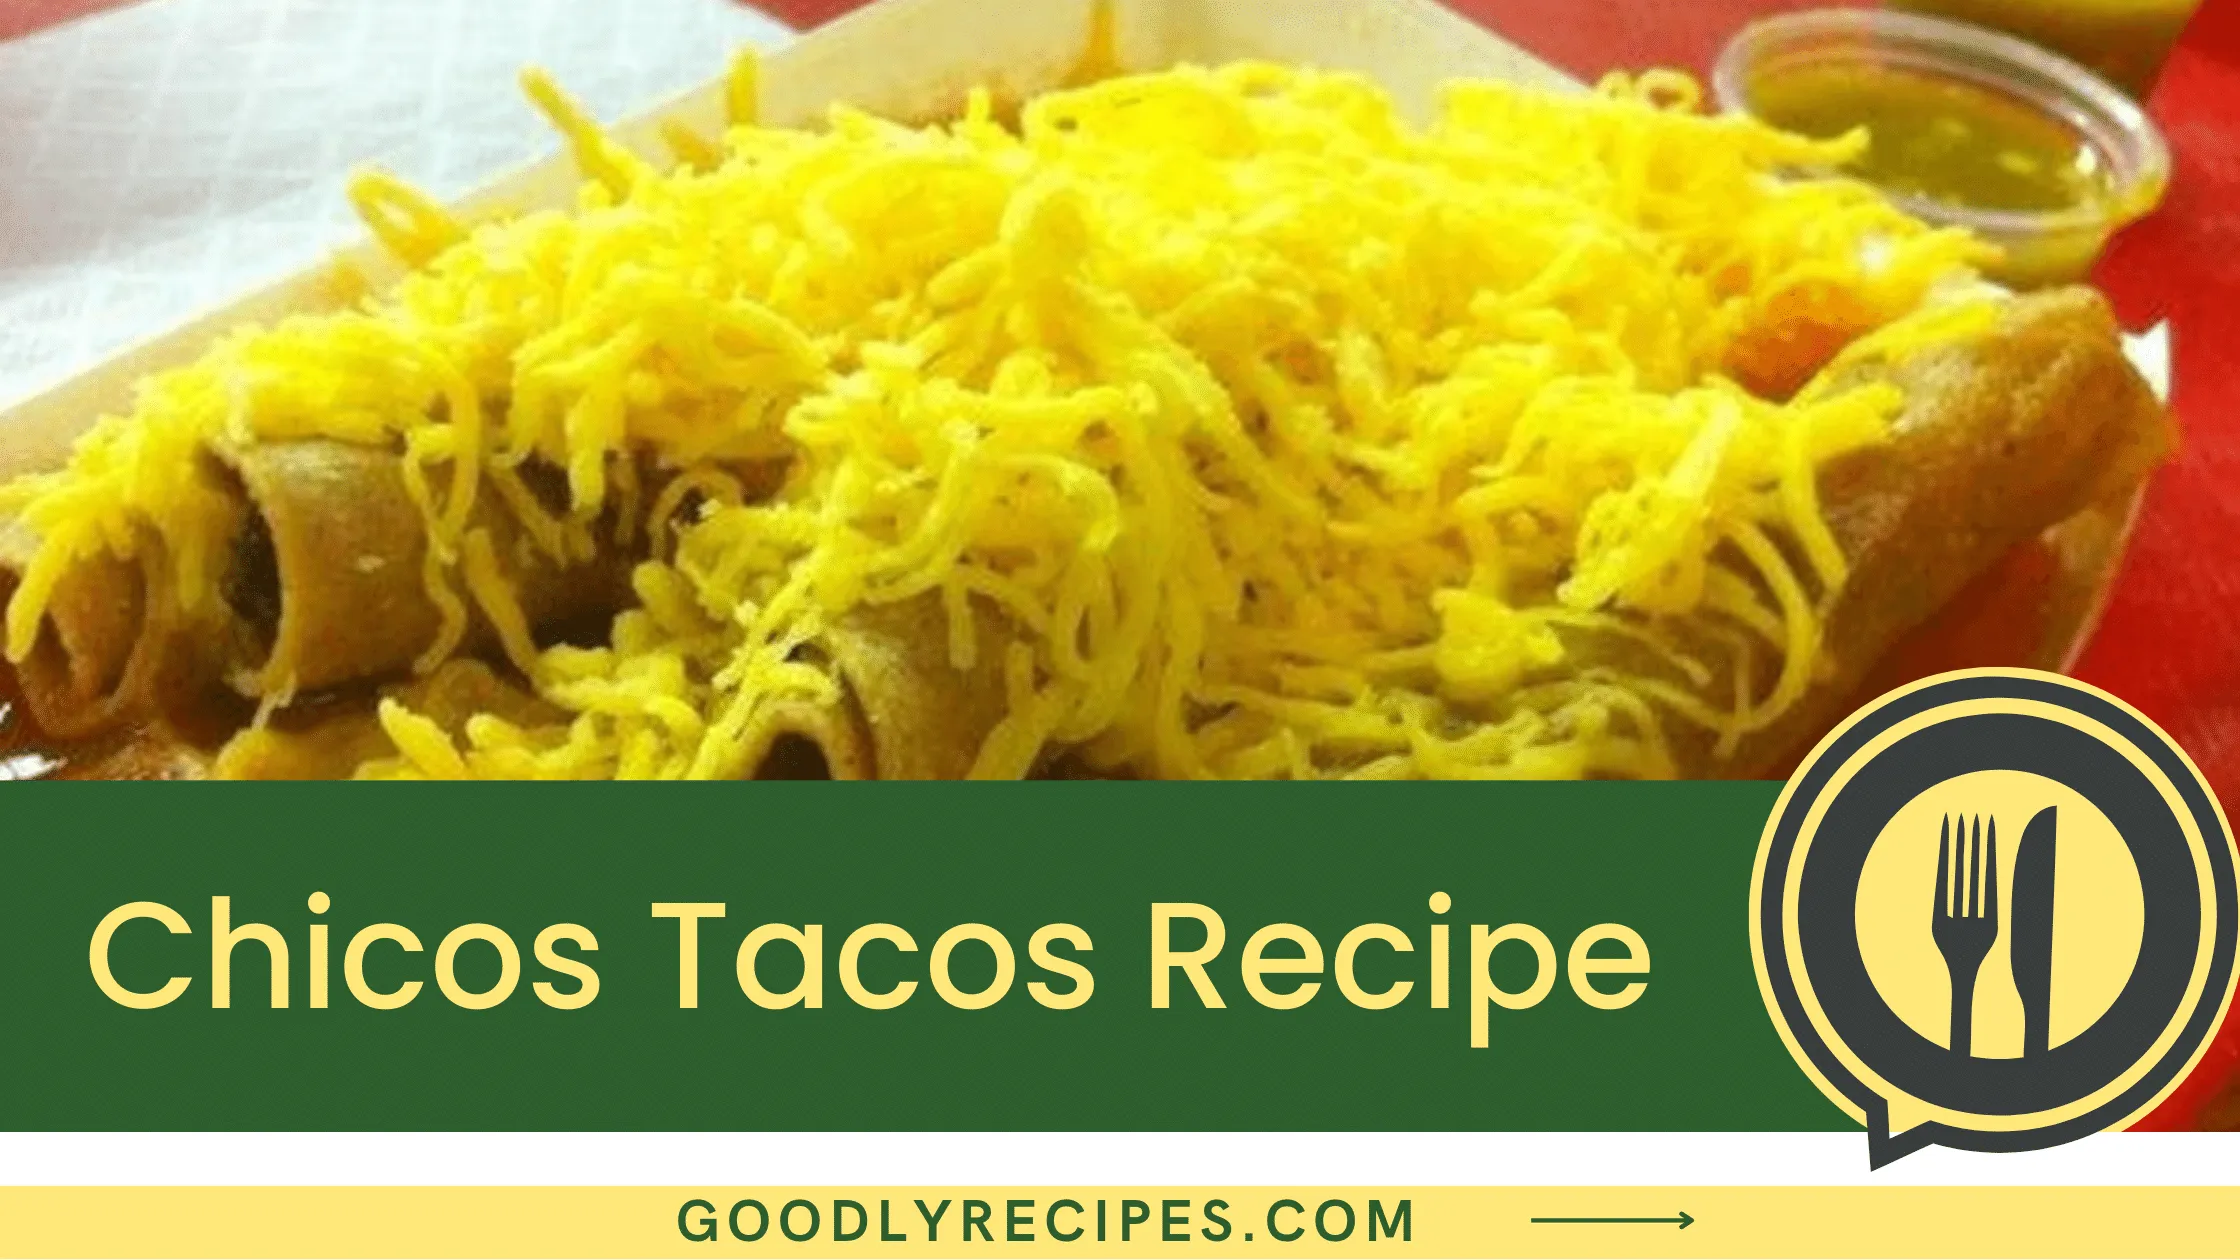 Chicos Tacos Recipe - For Food Lovers